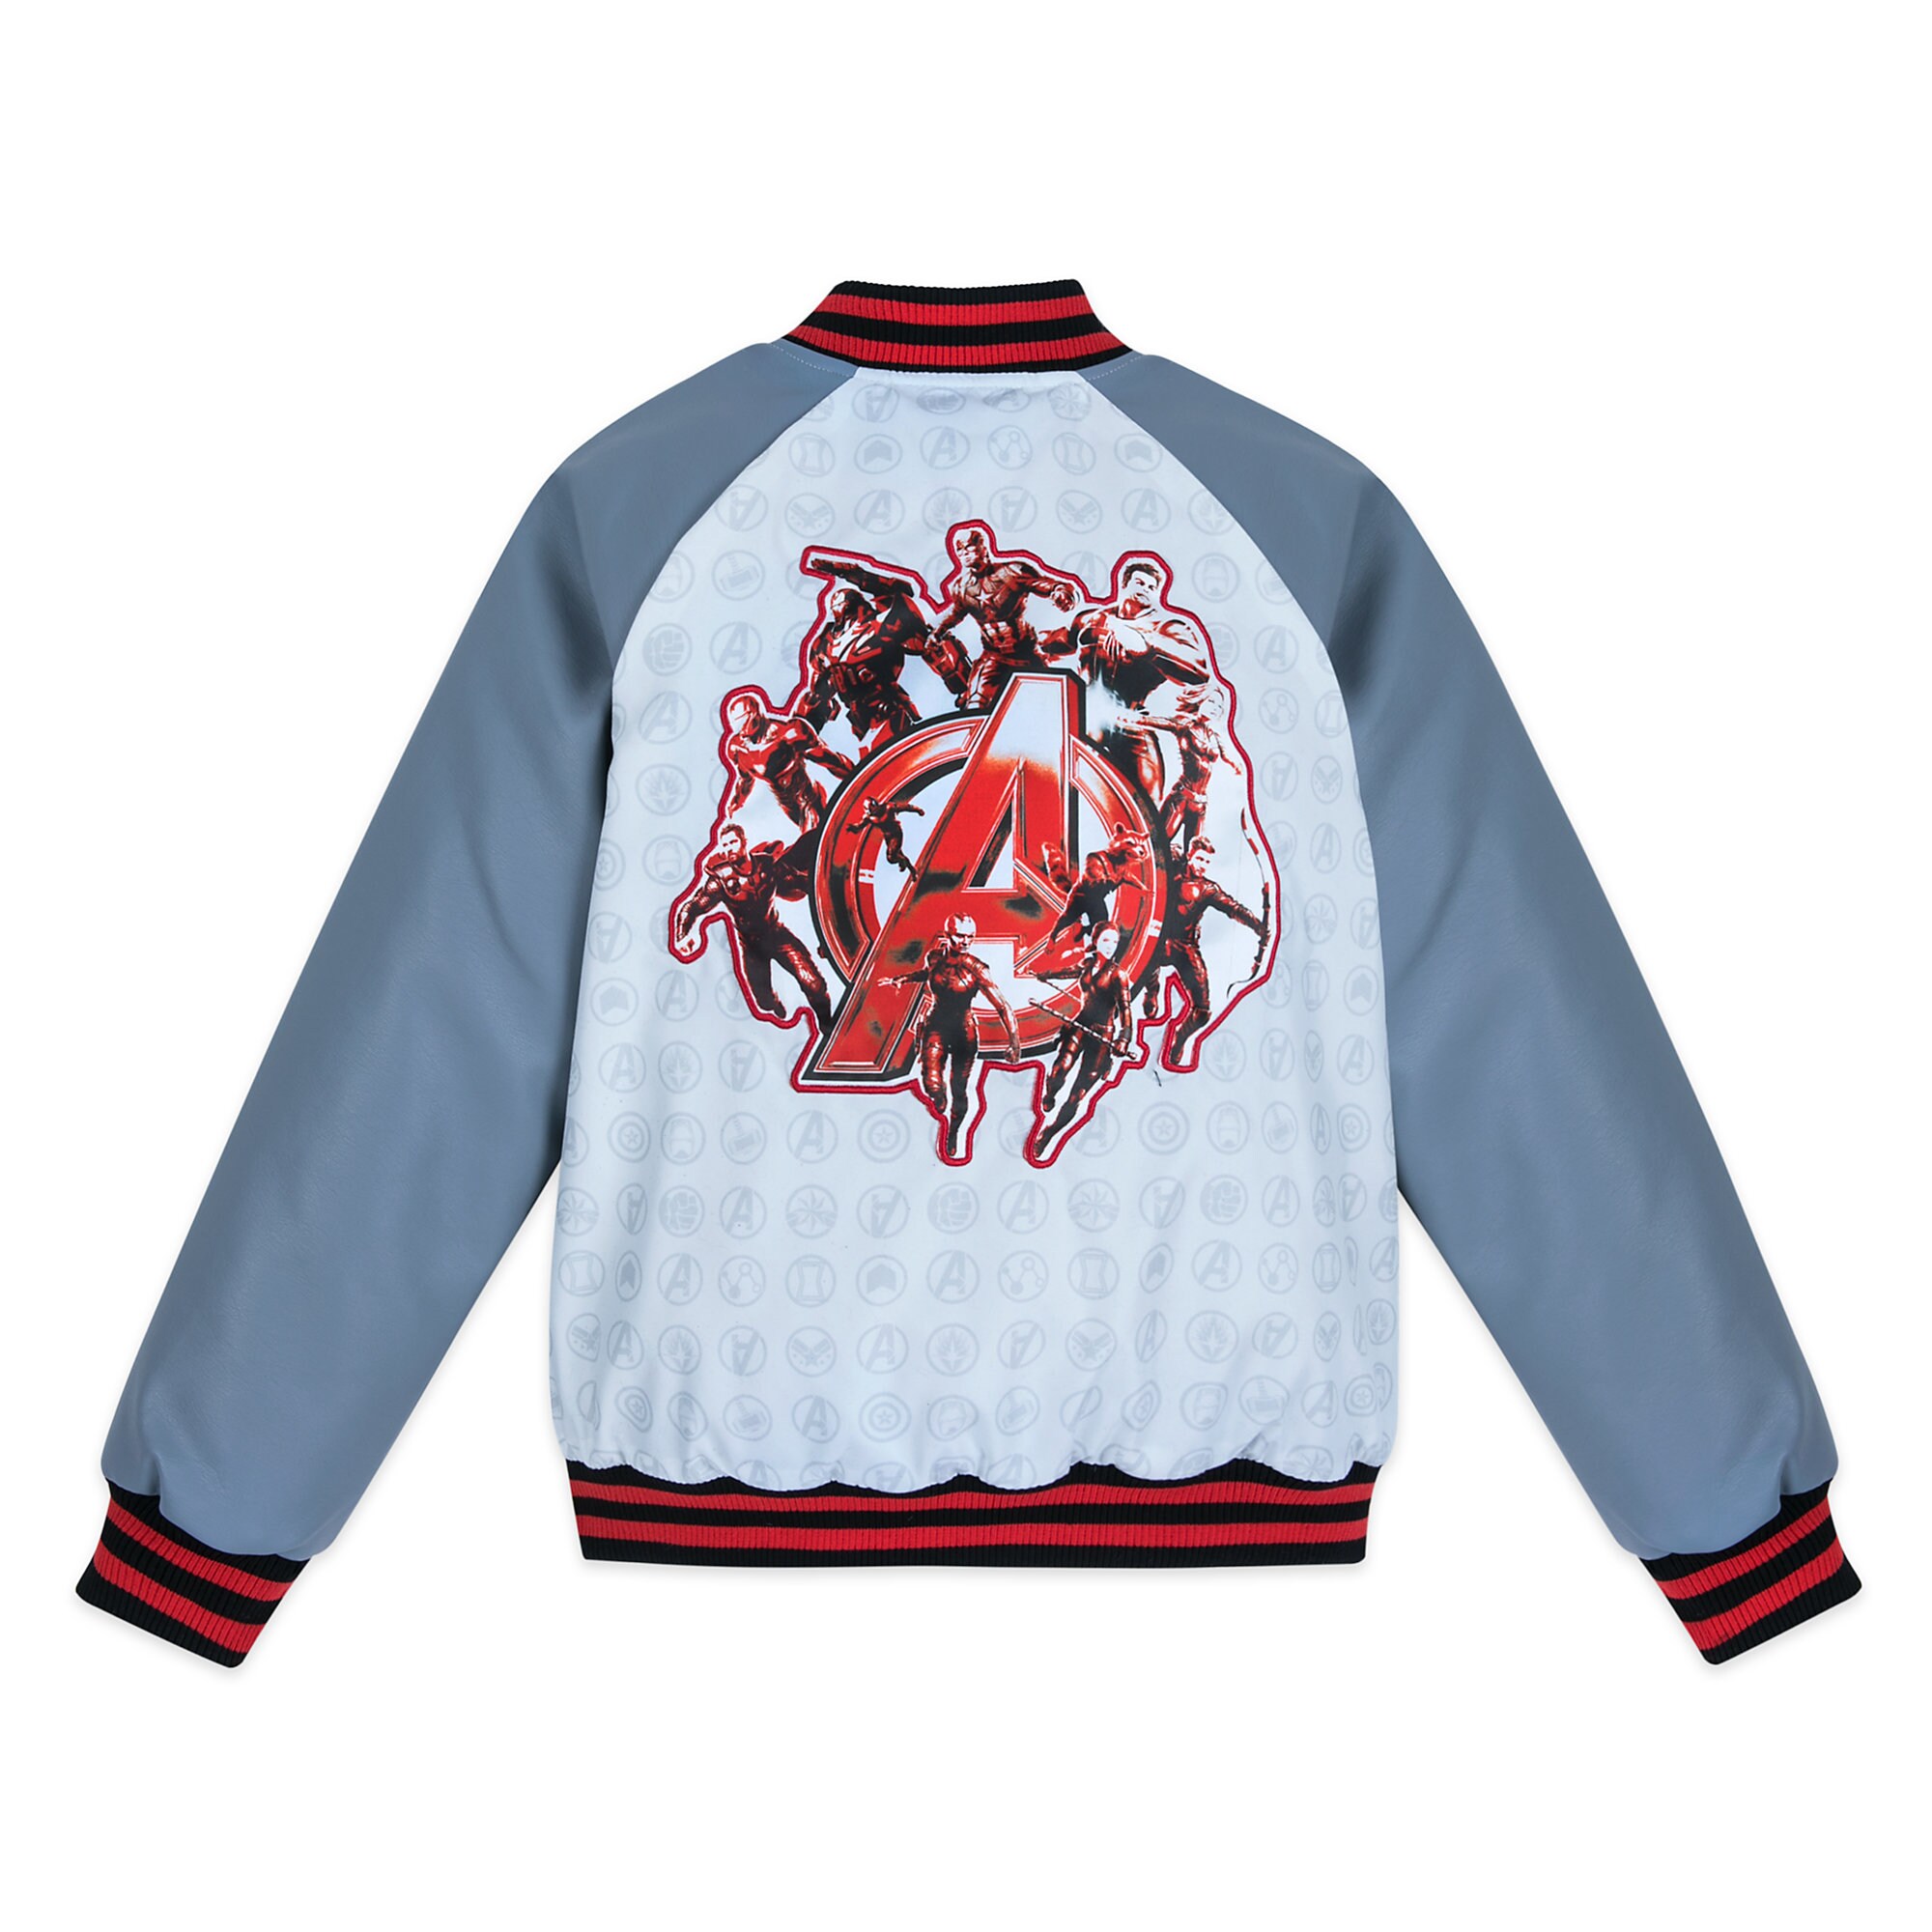 Marvel's Avengers Varsity Jacket for Boys - Personalized released today ...